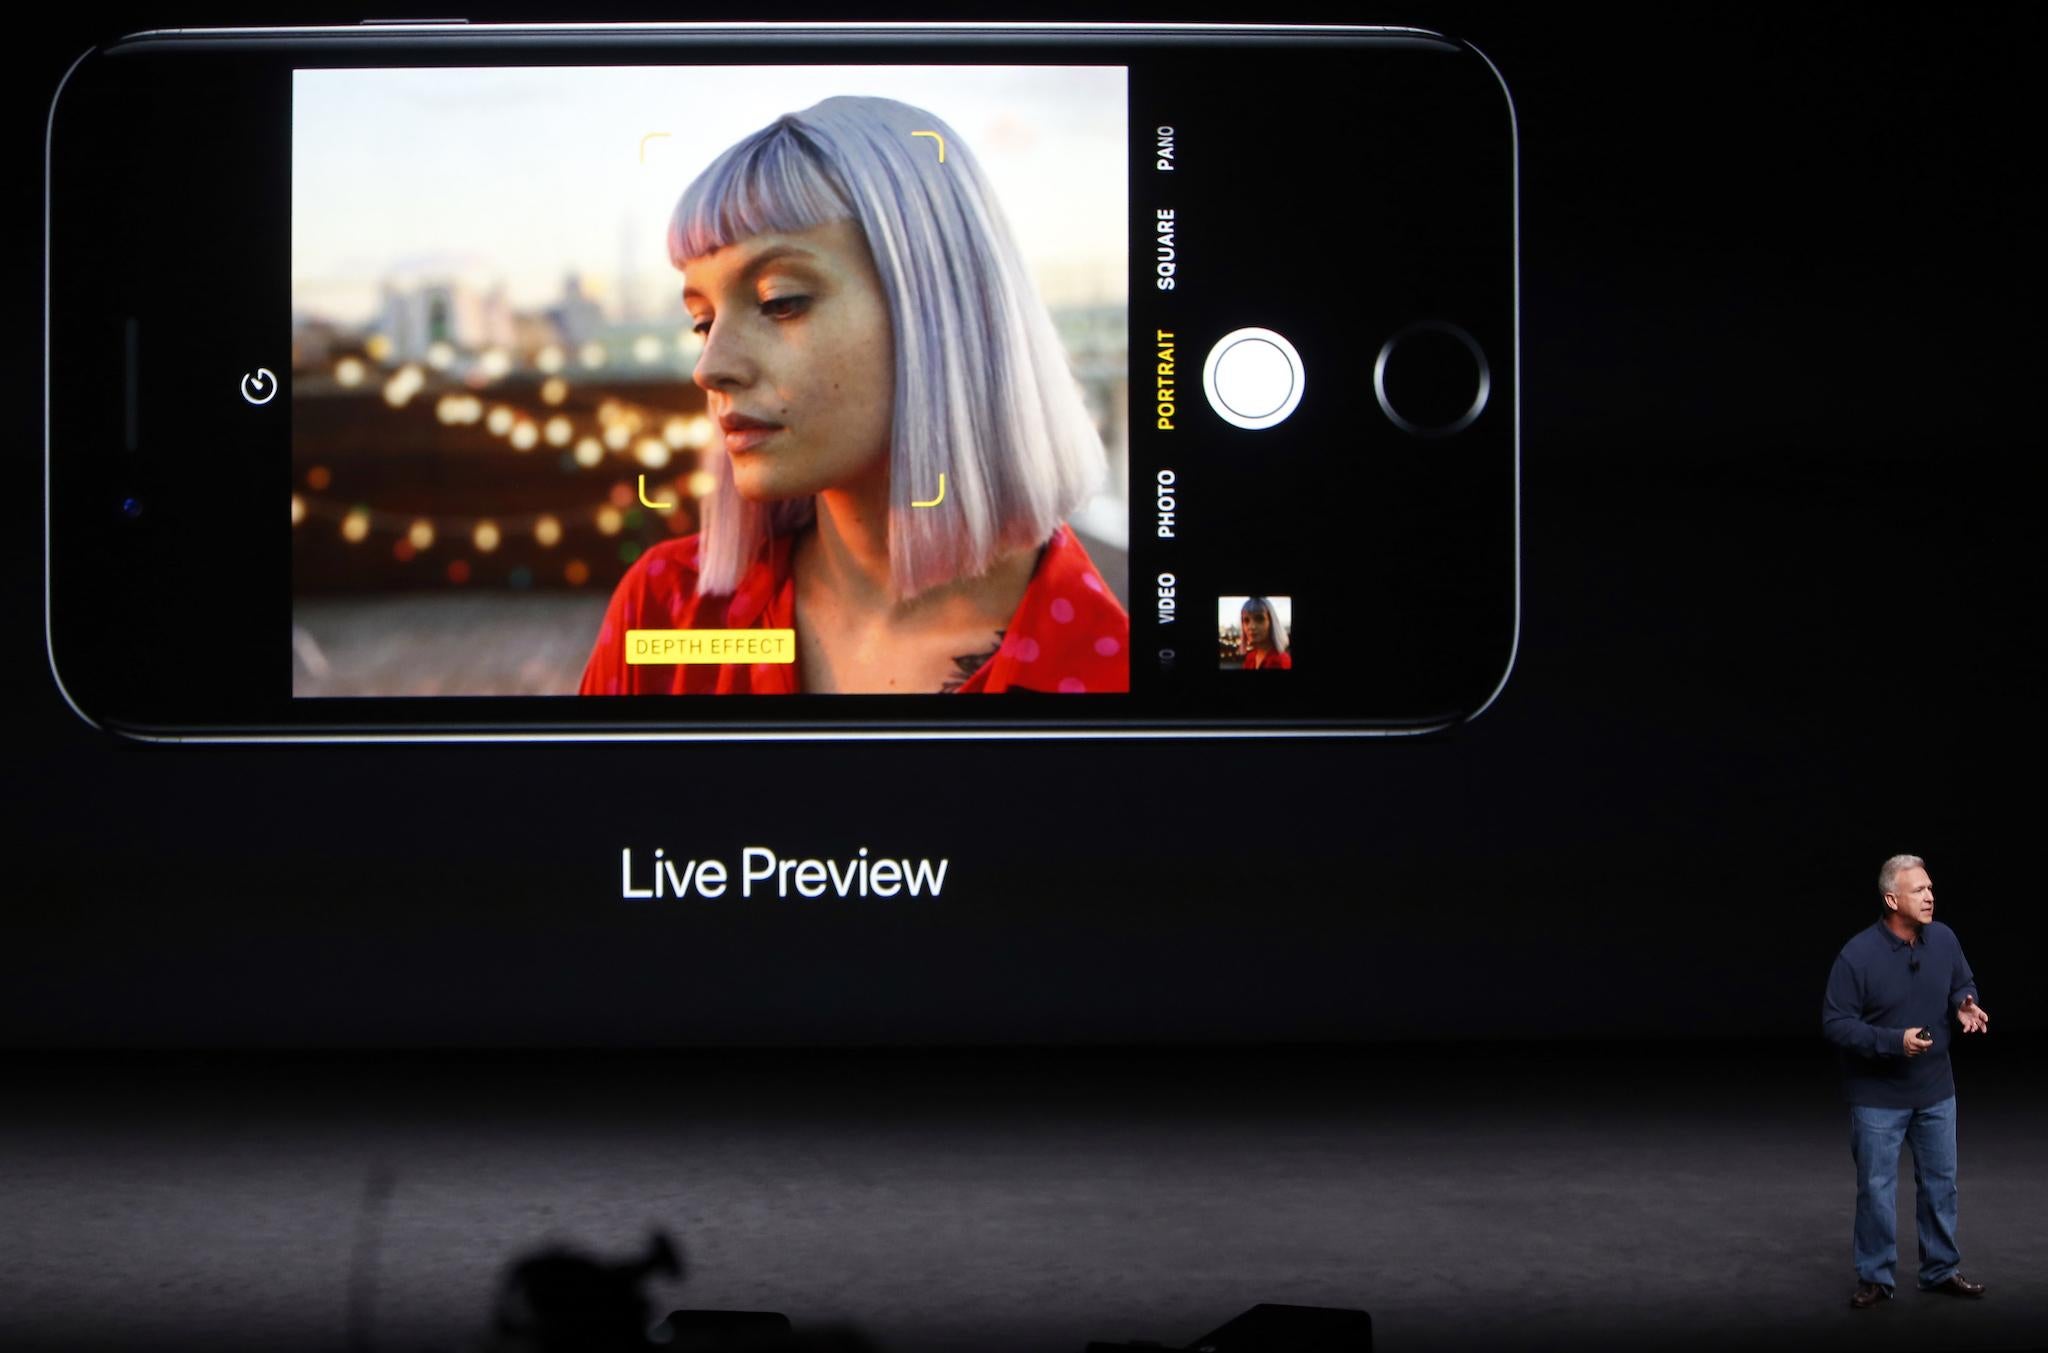 Phil Schiller, Senior Vice President of Worldwide Marketing at Apple Inc, discusses the depth of field and bokeh effects in the iPhone 7 Plus during an Apple media event in San Francisco, California, U.S. September 7, 2016